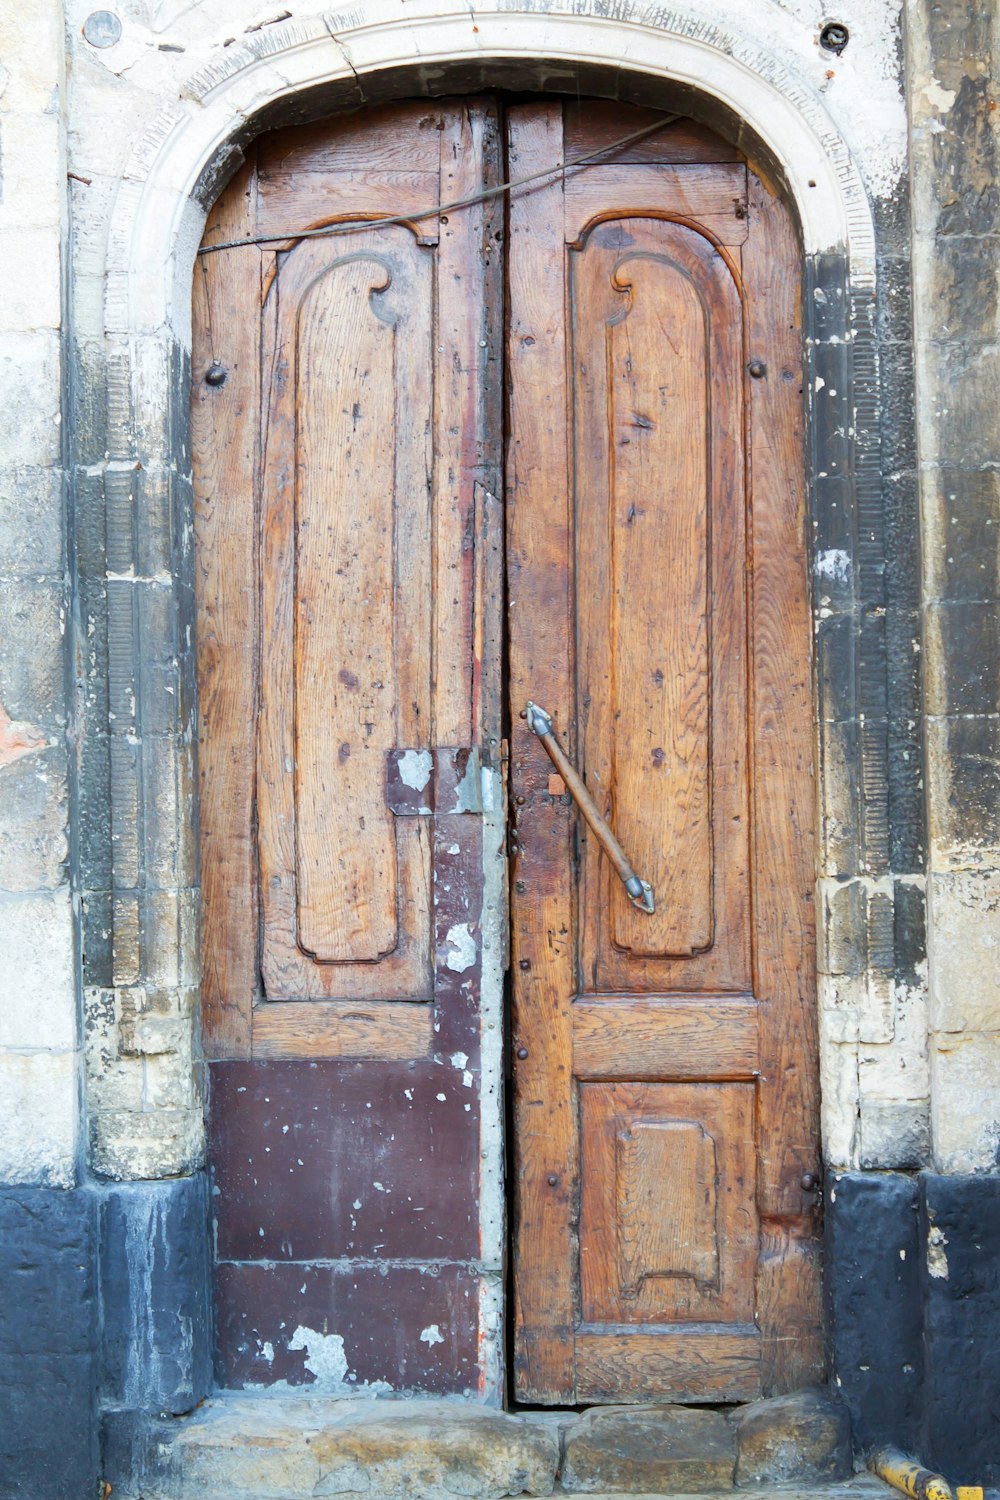 a large wooden door with a metal handle